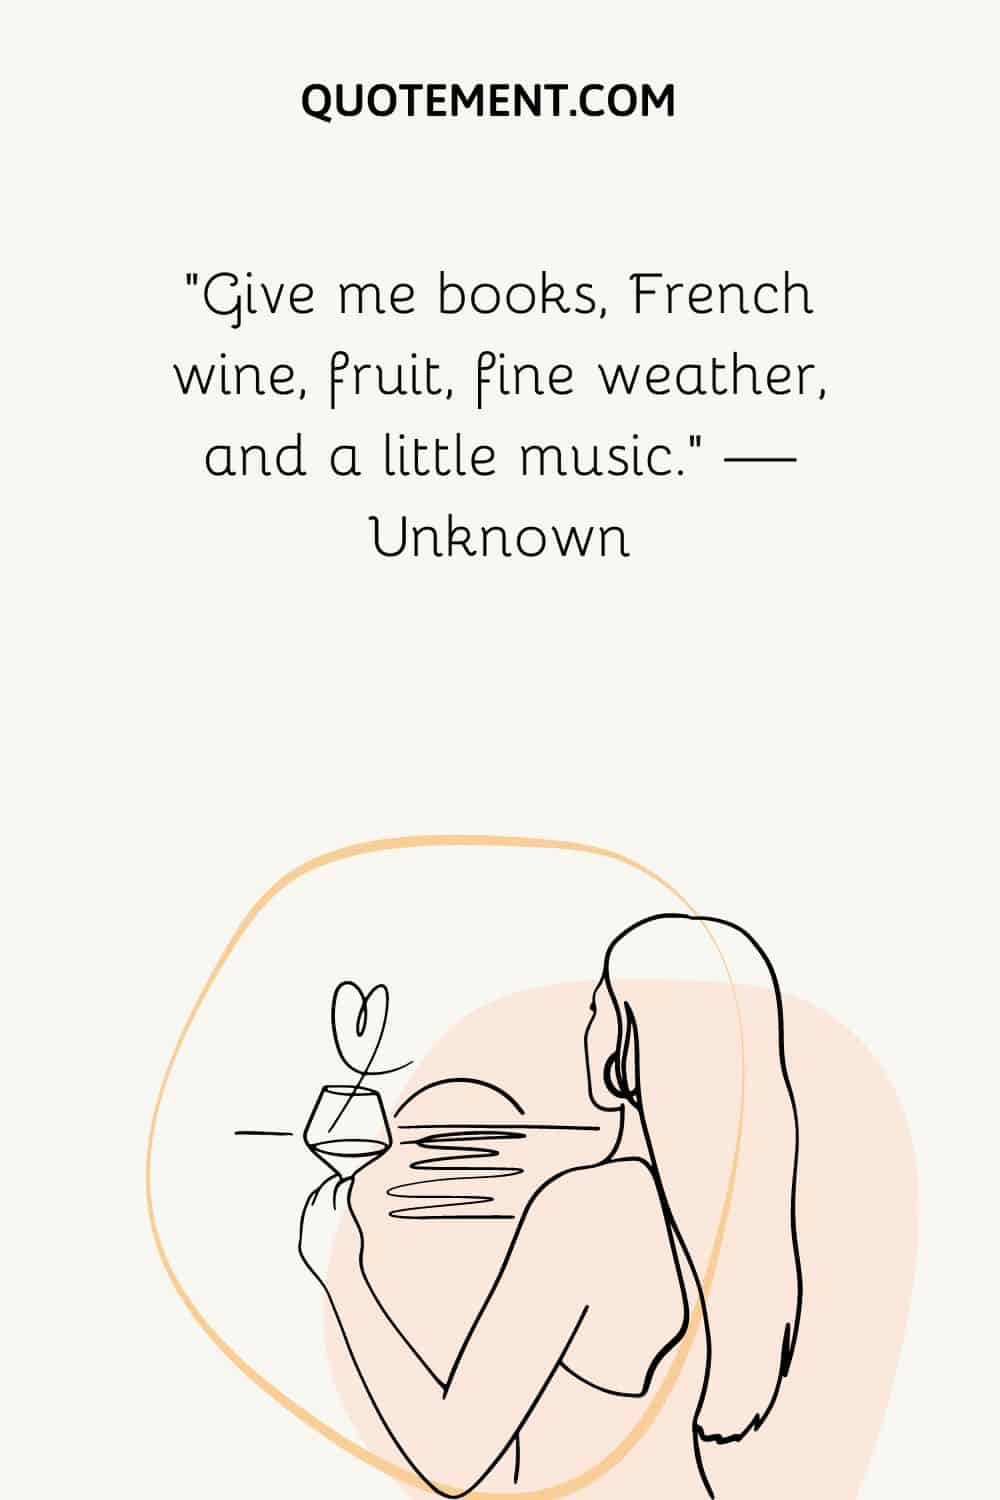 “Give me books, French wine, fruit, fine weather, and a little music.” — Unknown